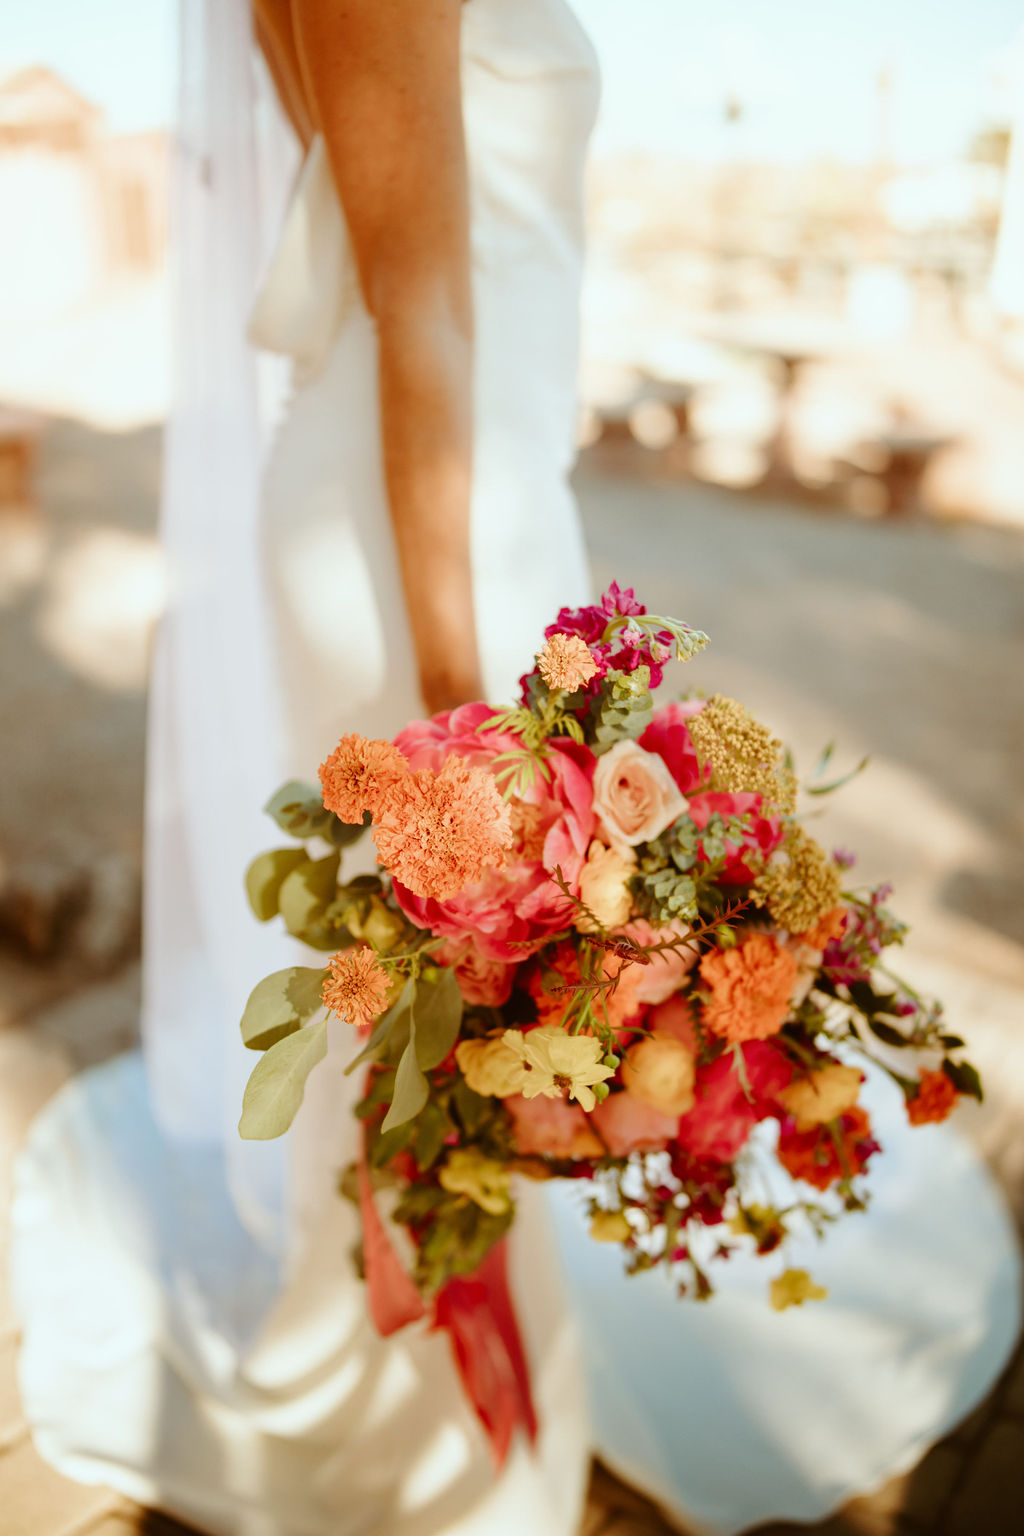 Bride's Colorful Bright & Bold Bouquet with Bright Pink, Peachy, Mustard 